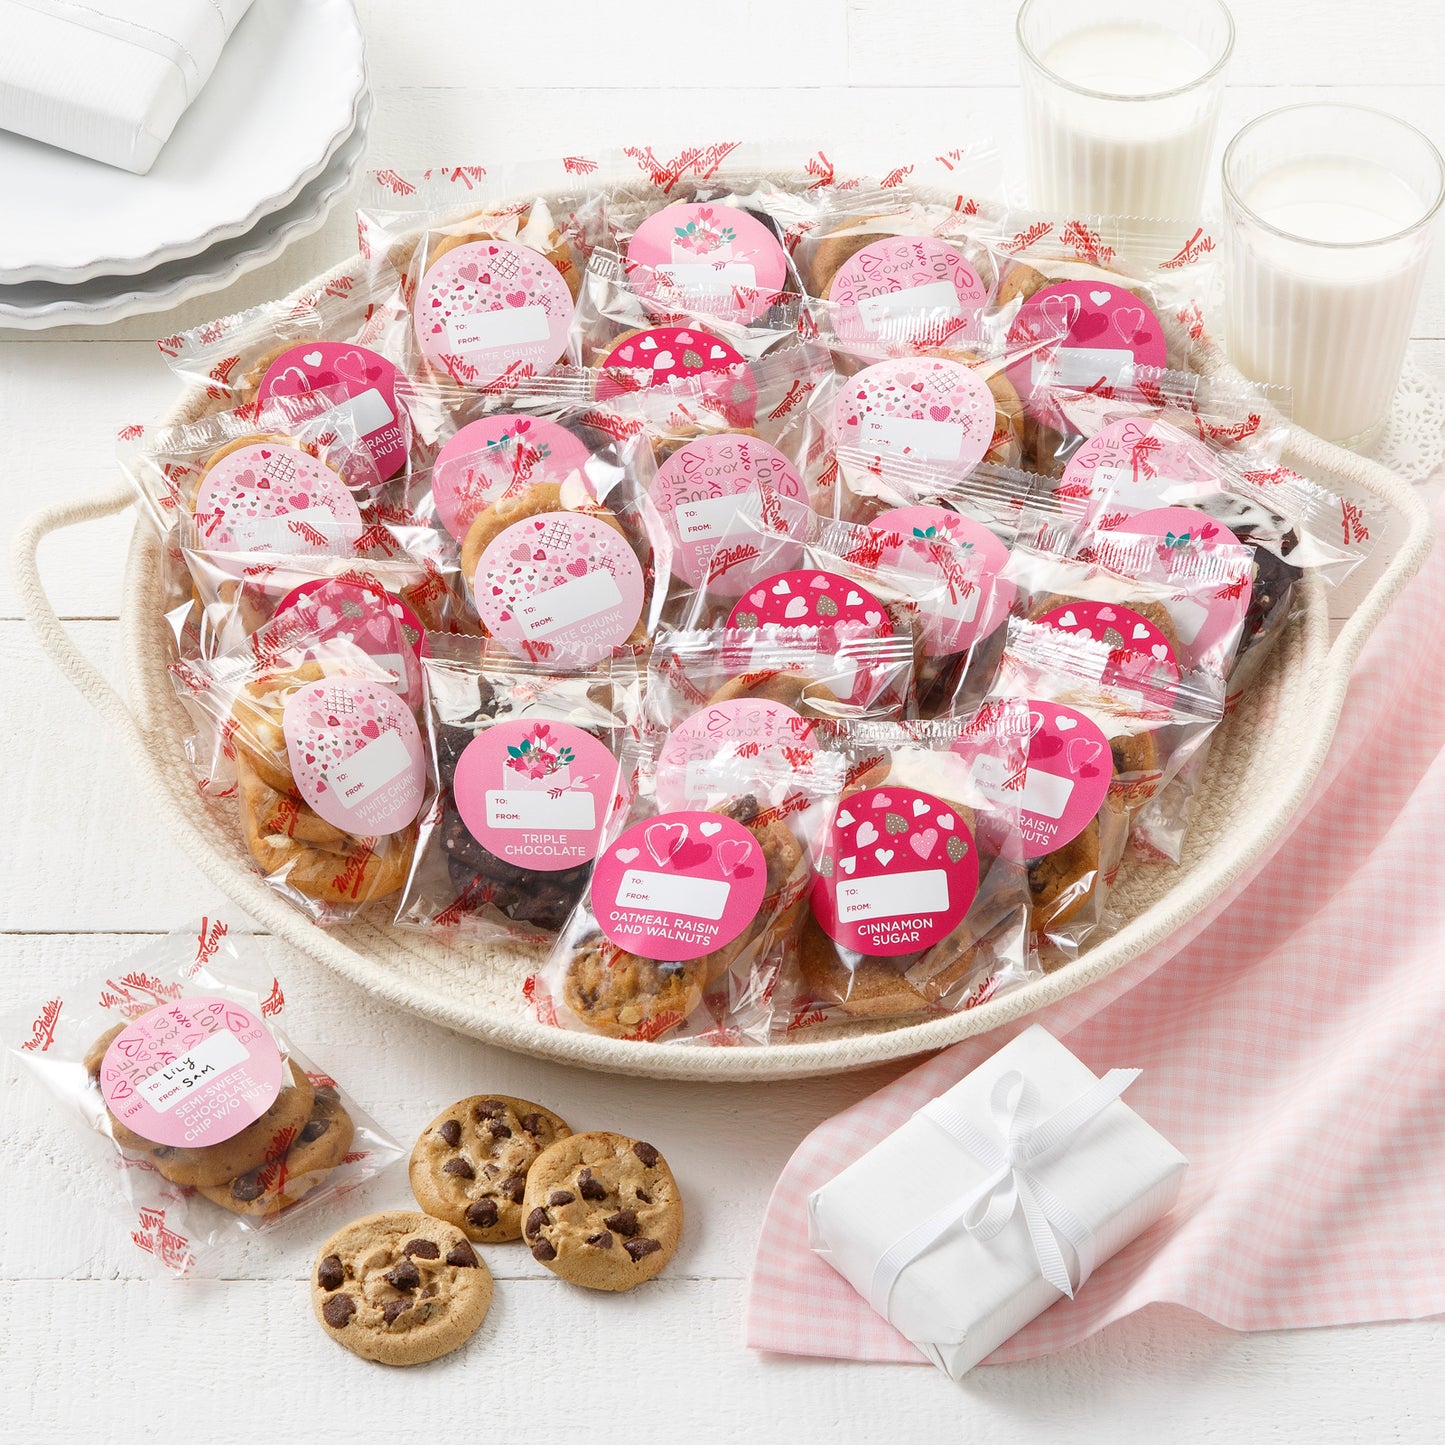 An assortment of packaged nibblers with Valentine's Day themed stickers